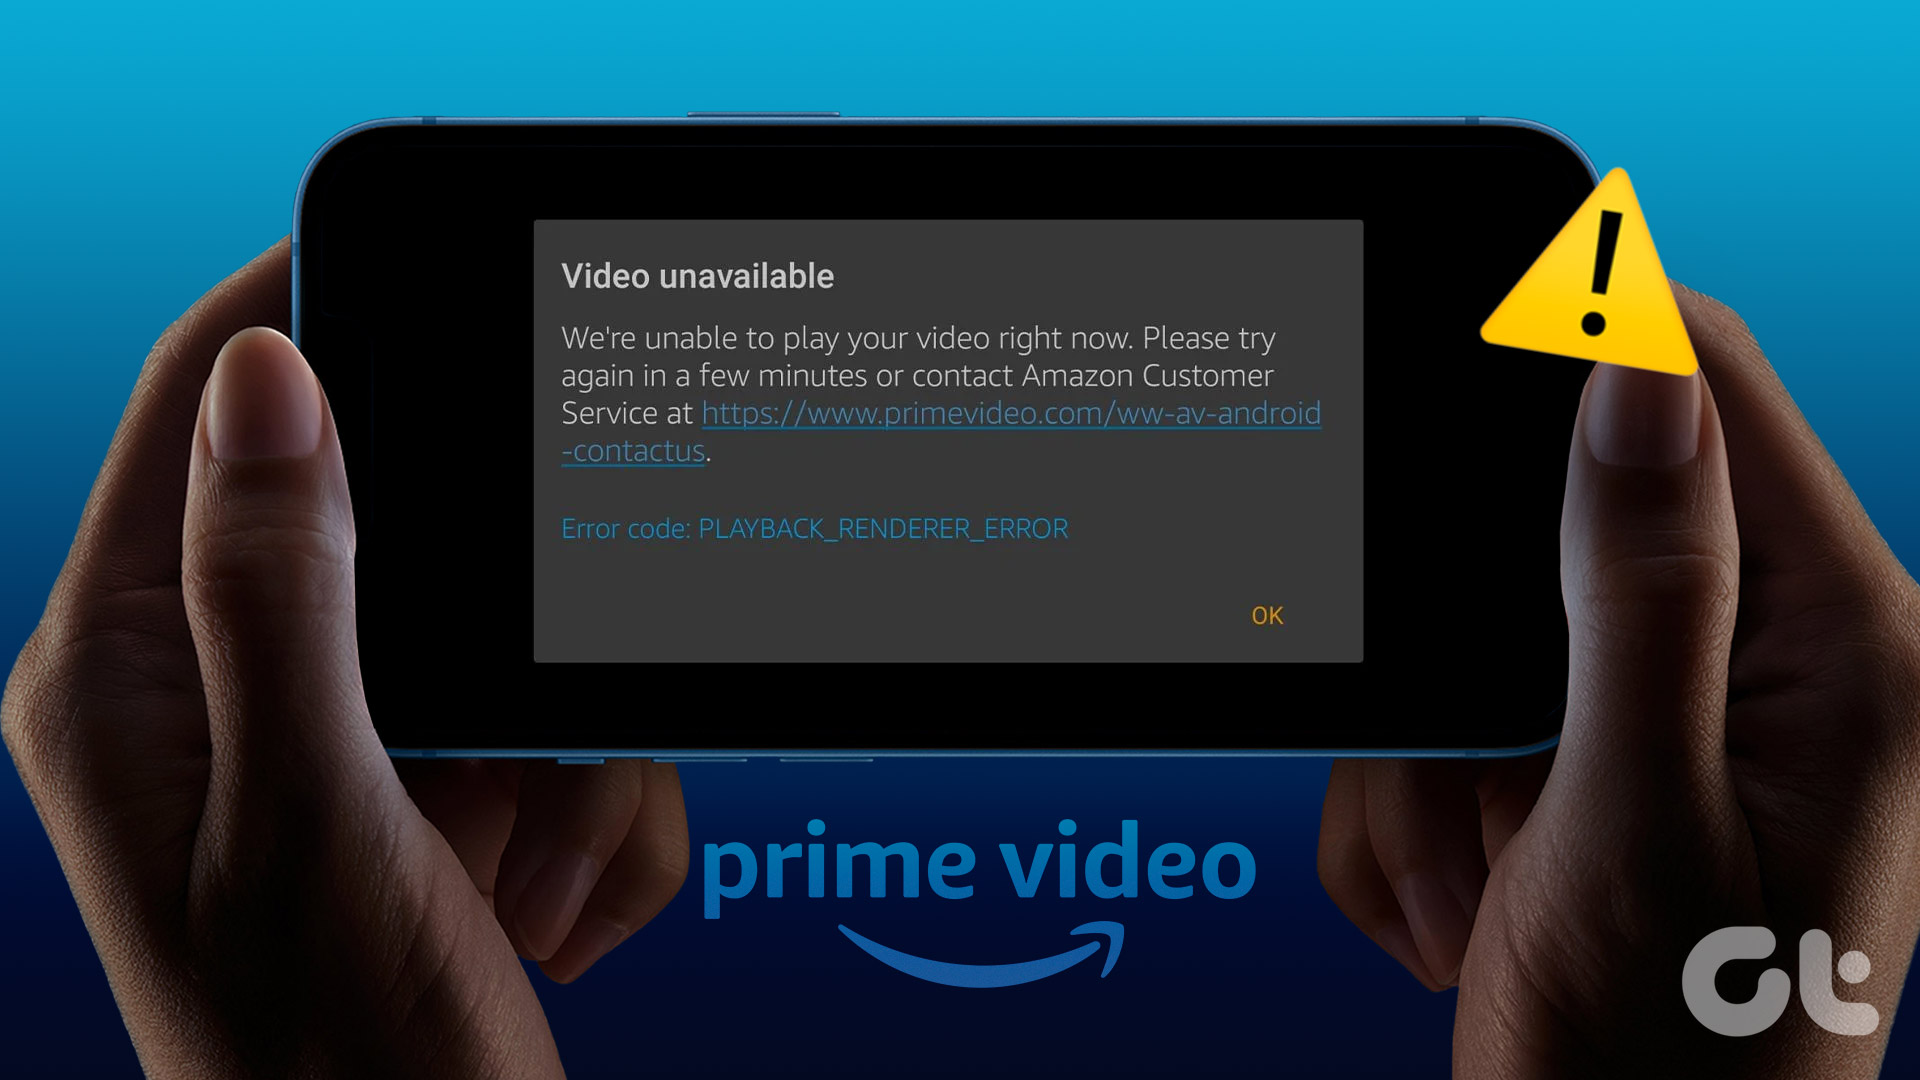 13 Ways to Fix Video Unavailable in Amazon Prime Video